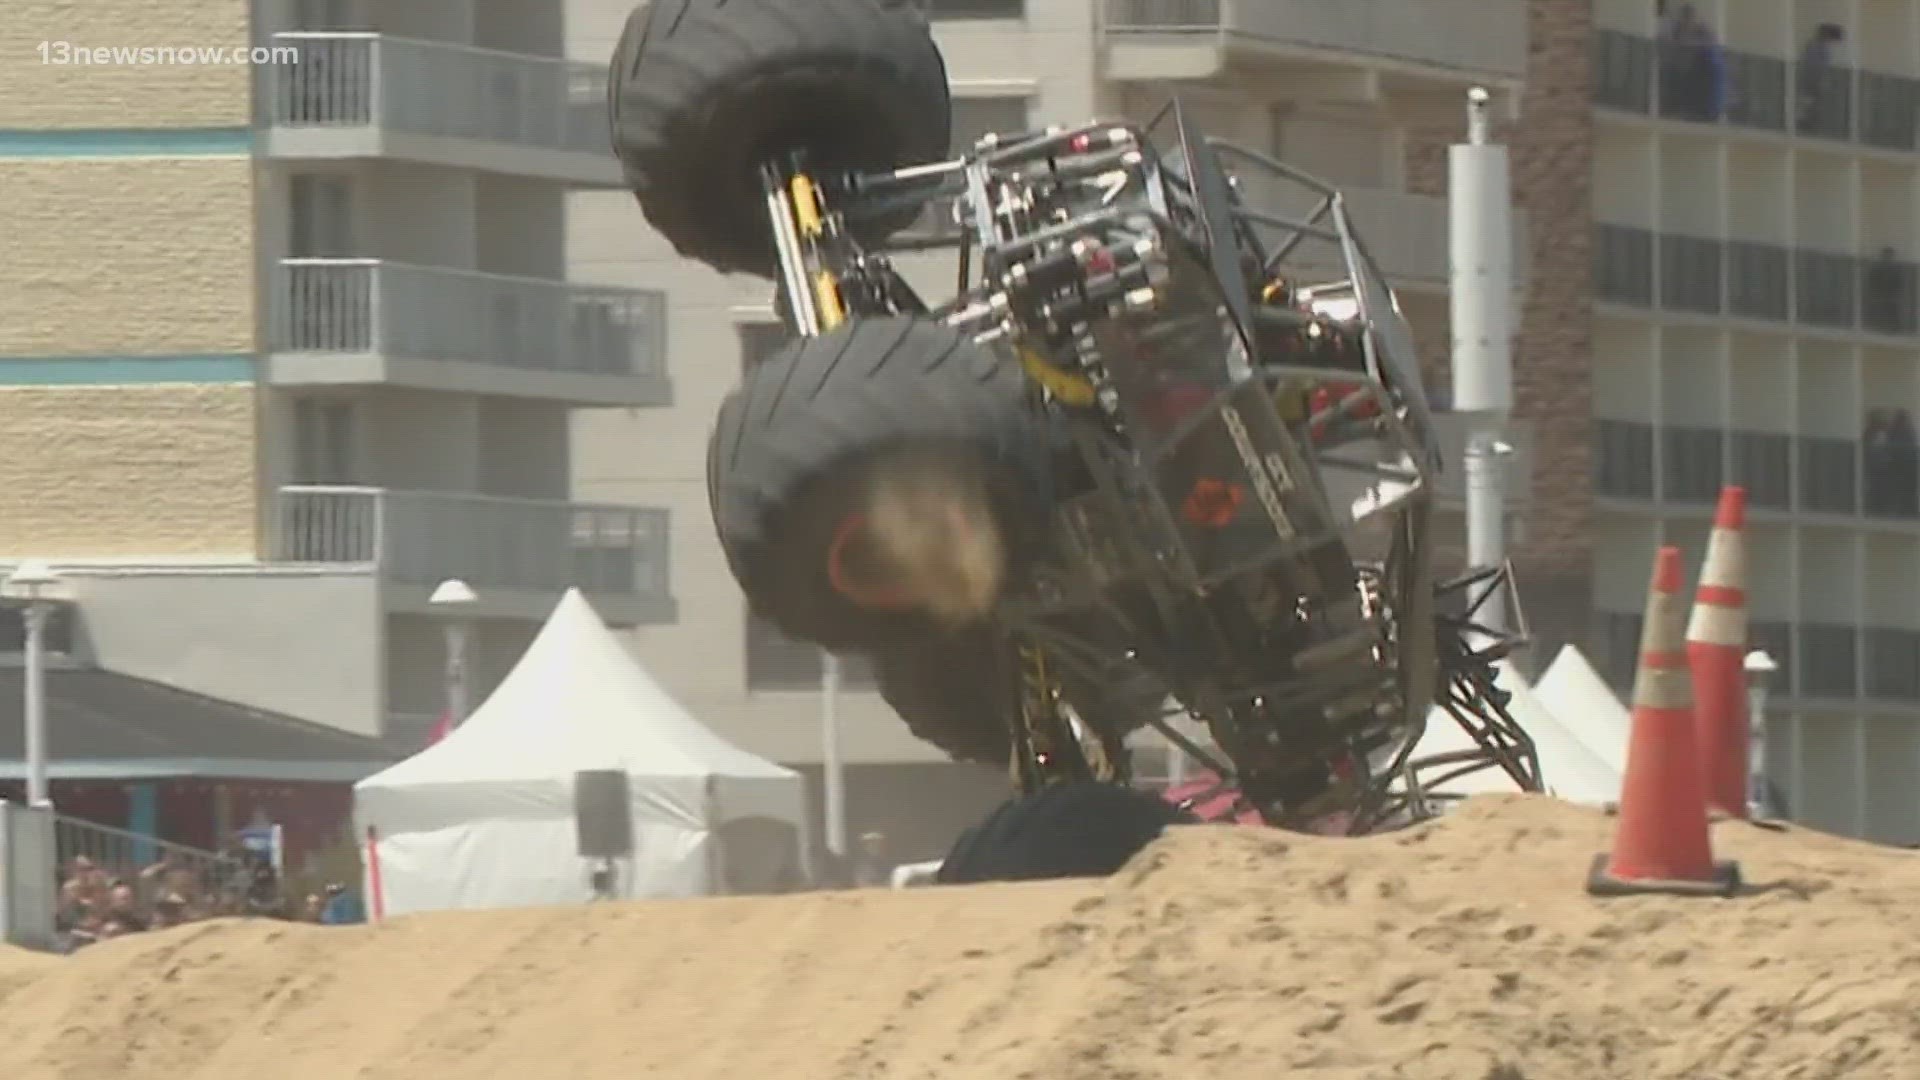 This weekend, eight monster trucks were out on the sand at the south end of the Virginia Beach Oceanfront in the resort area racing.